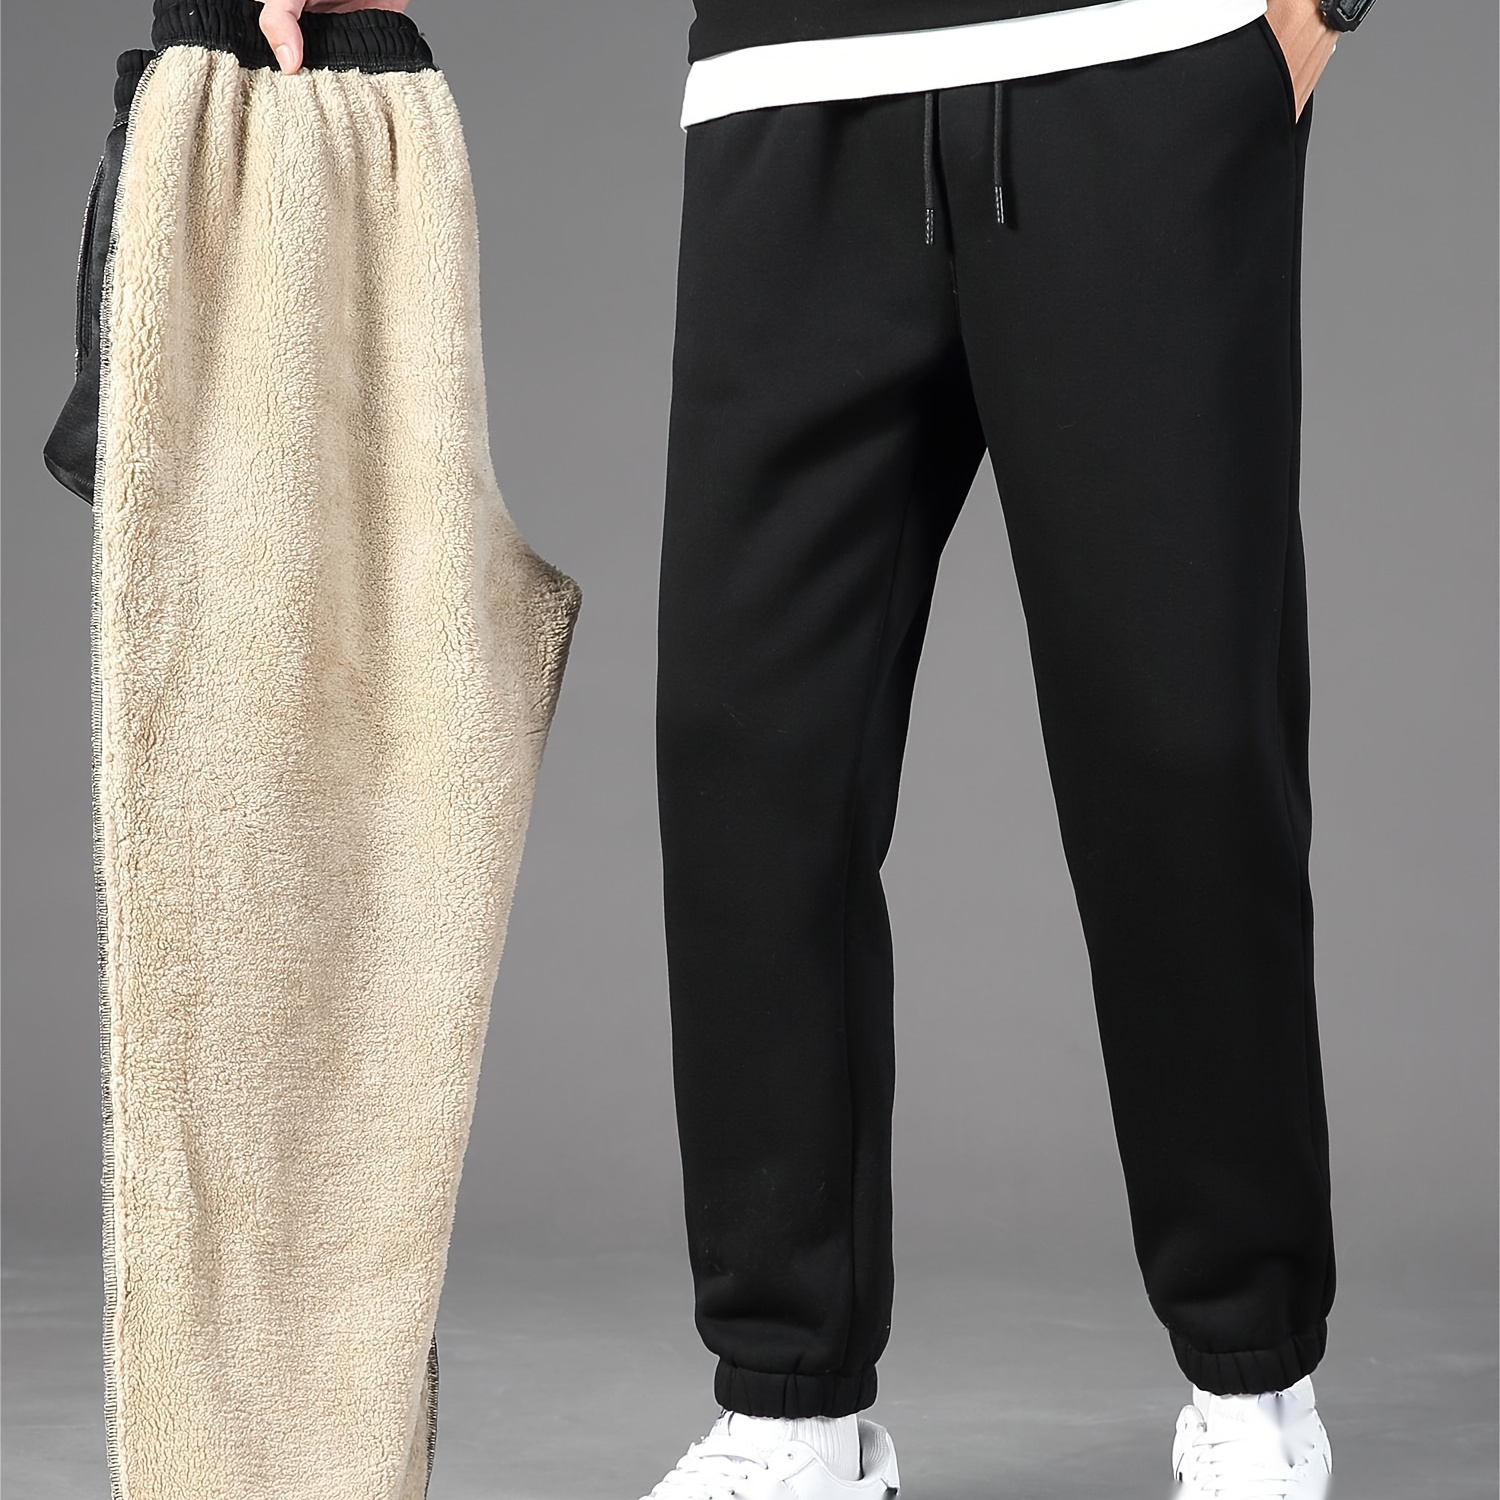 

Men's Casual Warm Fleece Joggers, Chic Stretch Sports Pants For Fall Winter